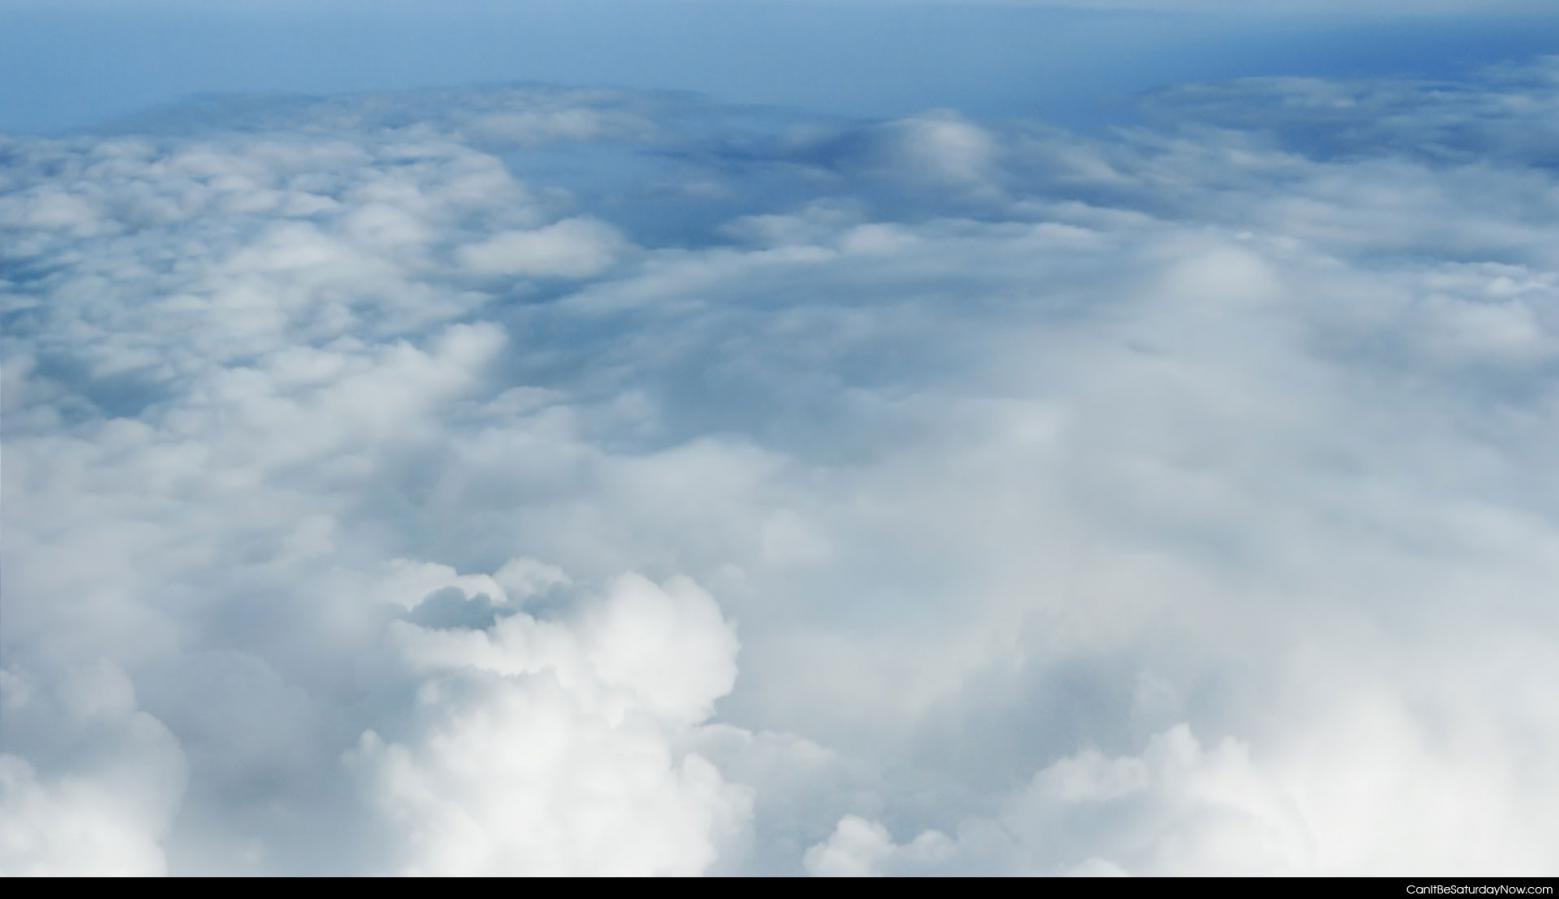 Over clouds - View from over clouds